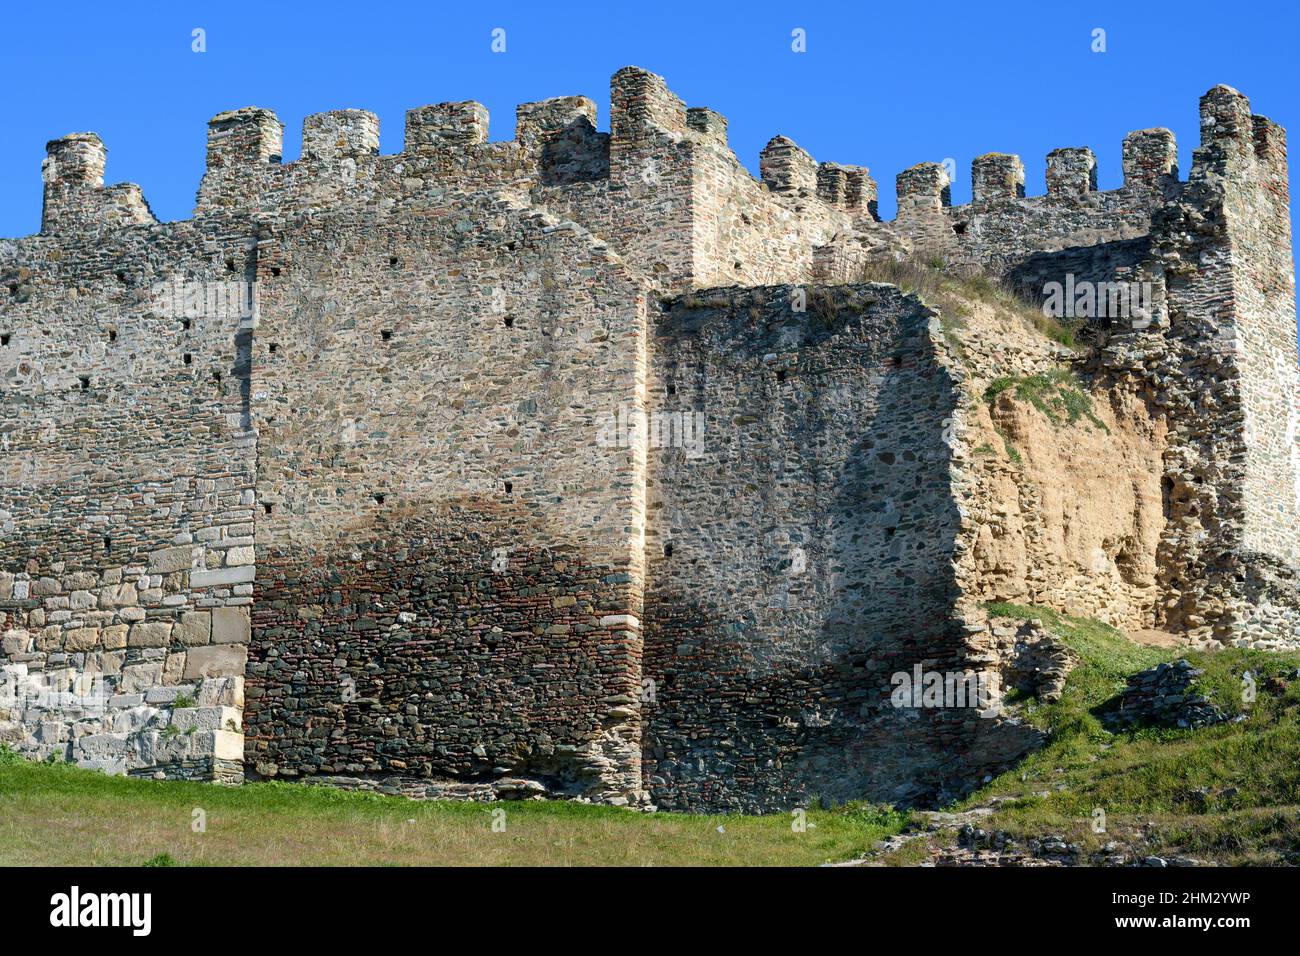 Part of the walls of the Heptapyrgion monument (also known as Yedi Kule) in Thessaloniki, Northern Greece Stock Photo